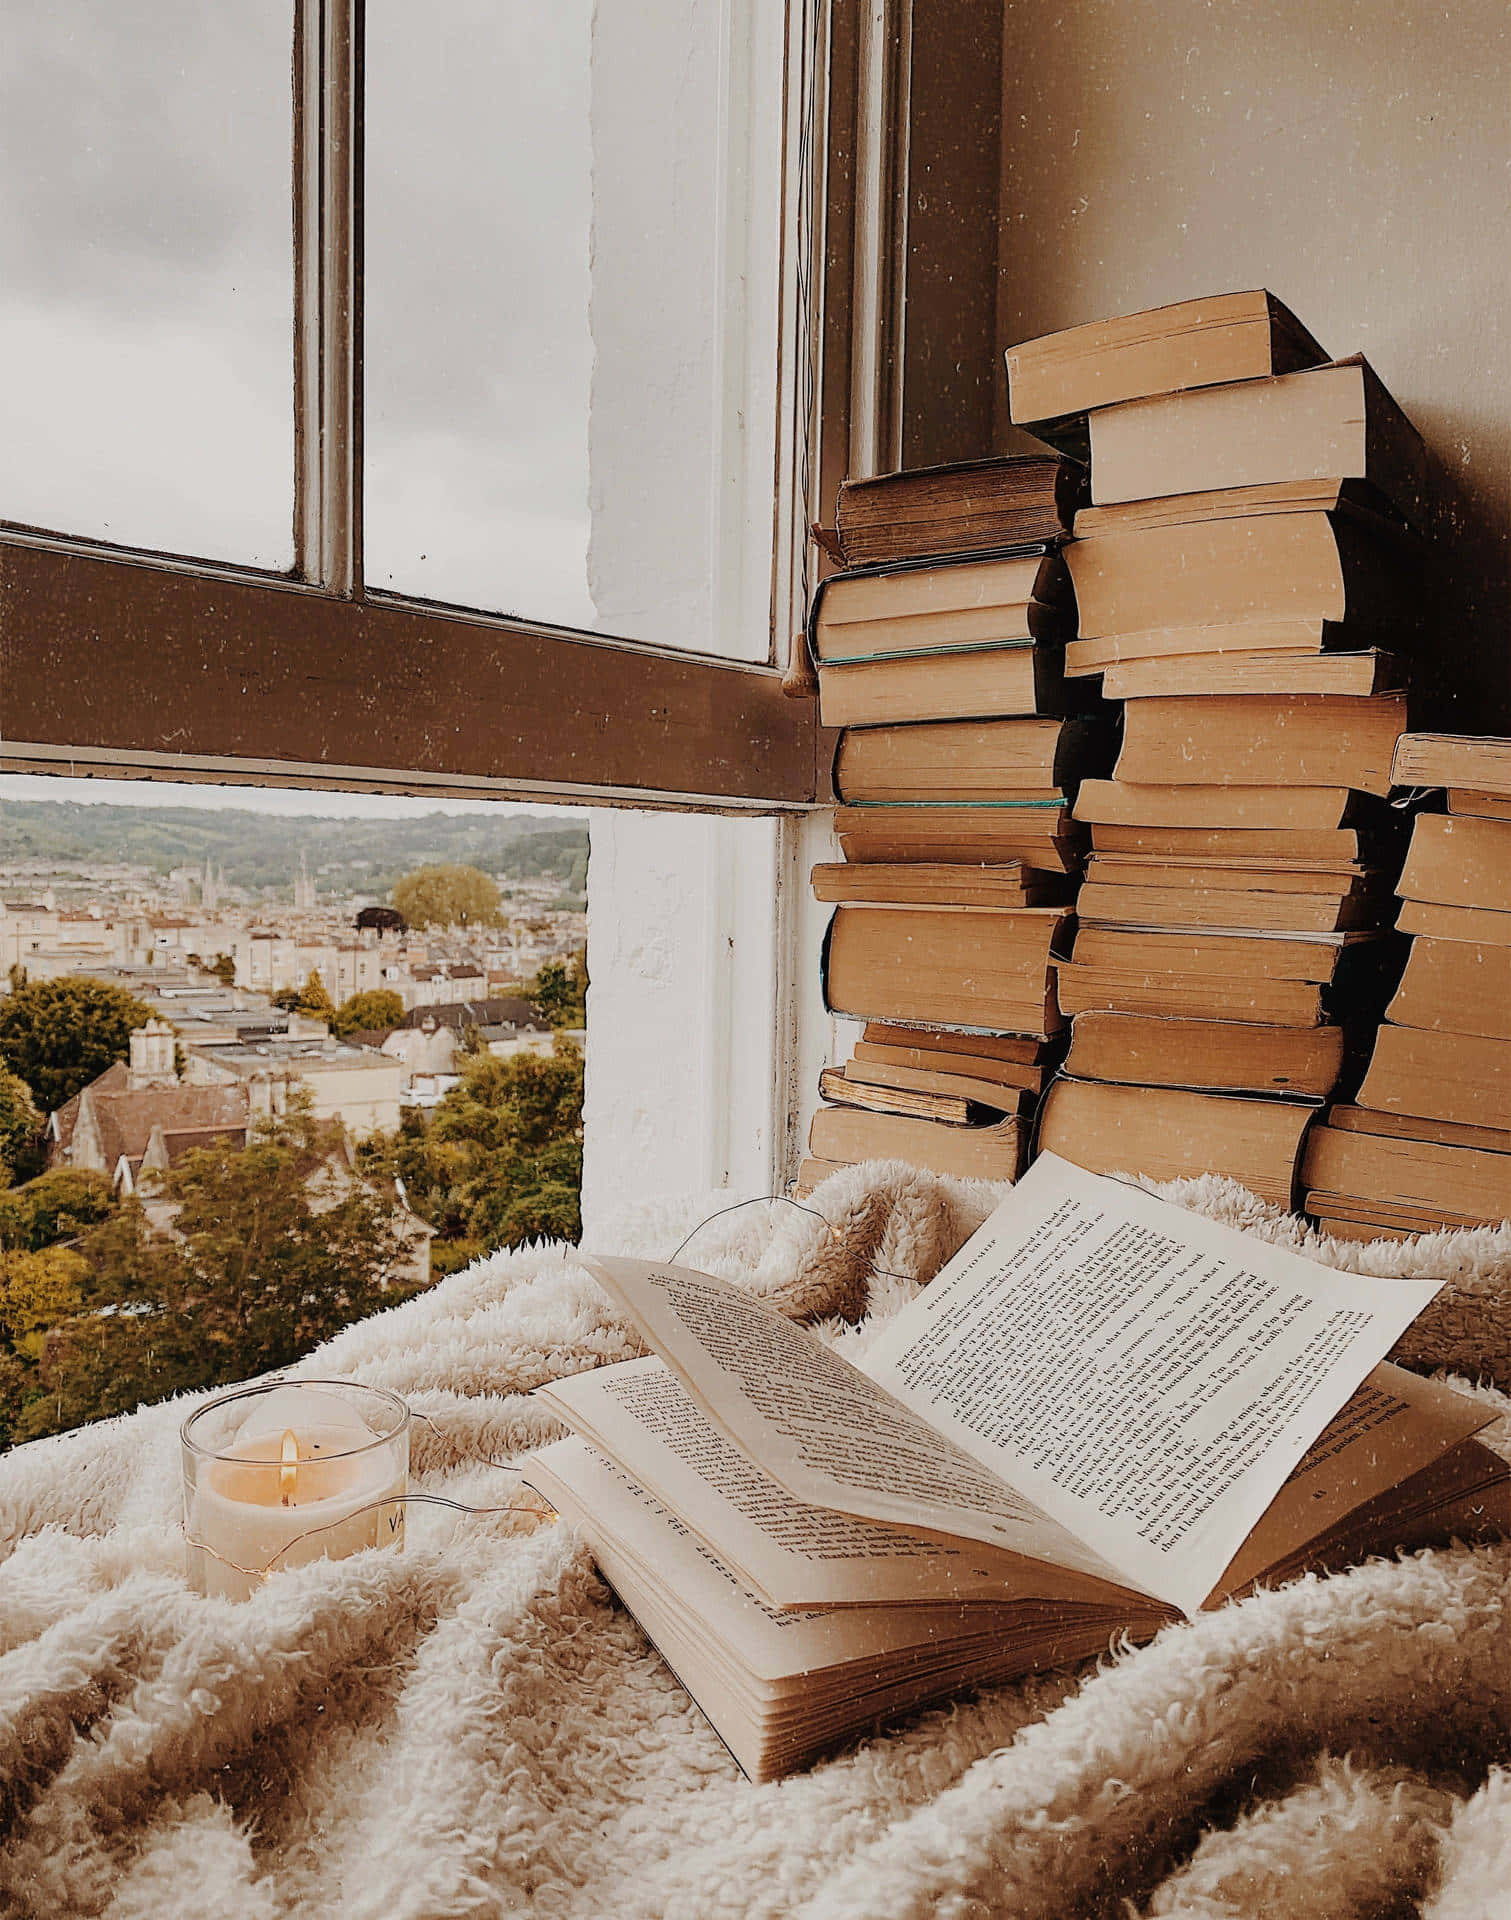 Cozy Reading Nook With View.jpg Wallpaper